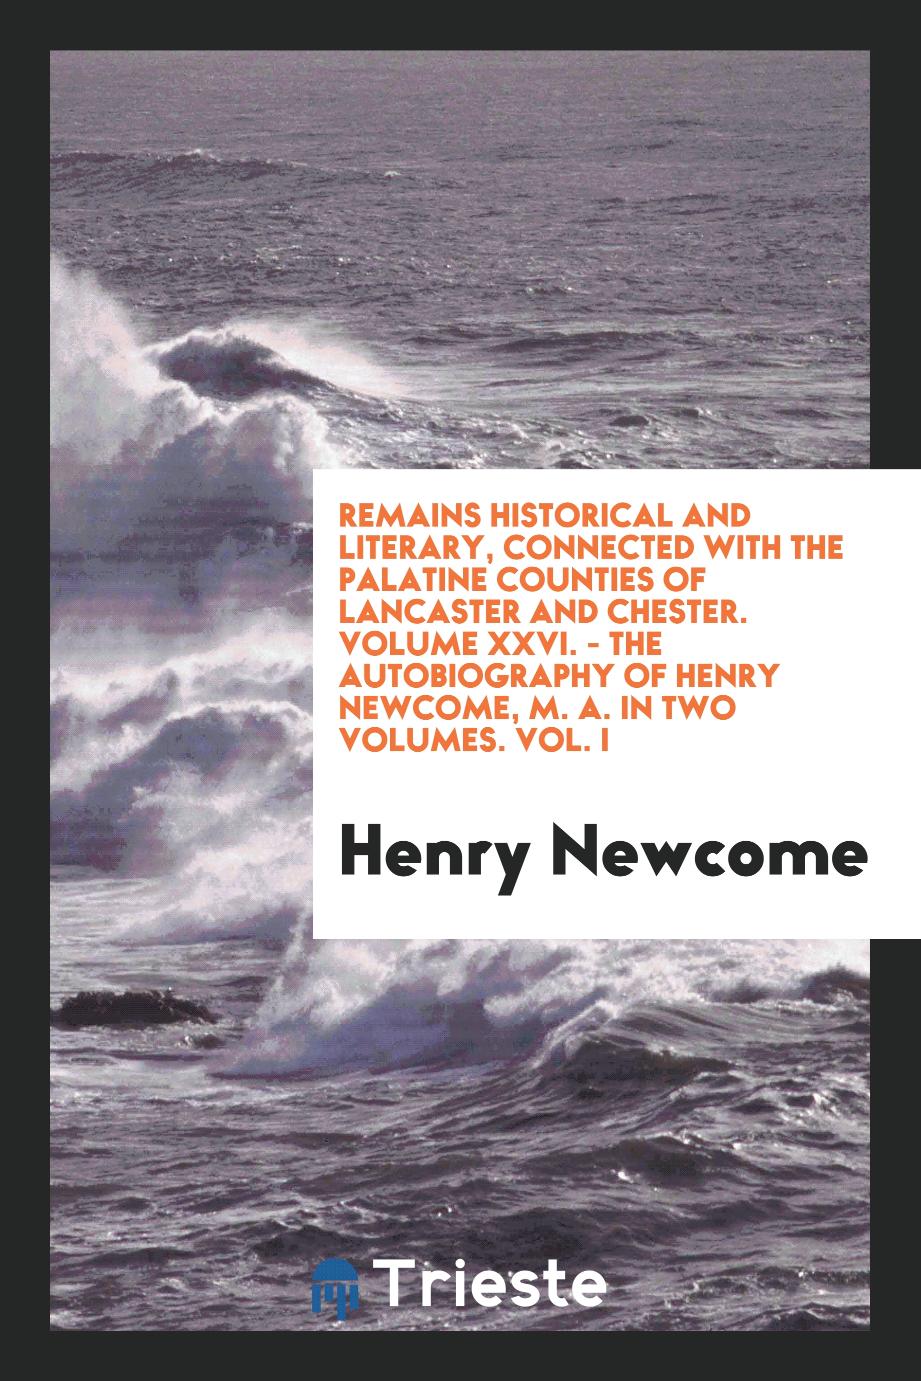 Remains Historical and Literary, Connected with the Palatine Counties of Lancaster and Chester. Volume XXVI. - The Autobiography of Henry Newcome, M. A. In two Volumes. Vol. I